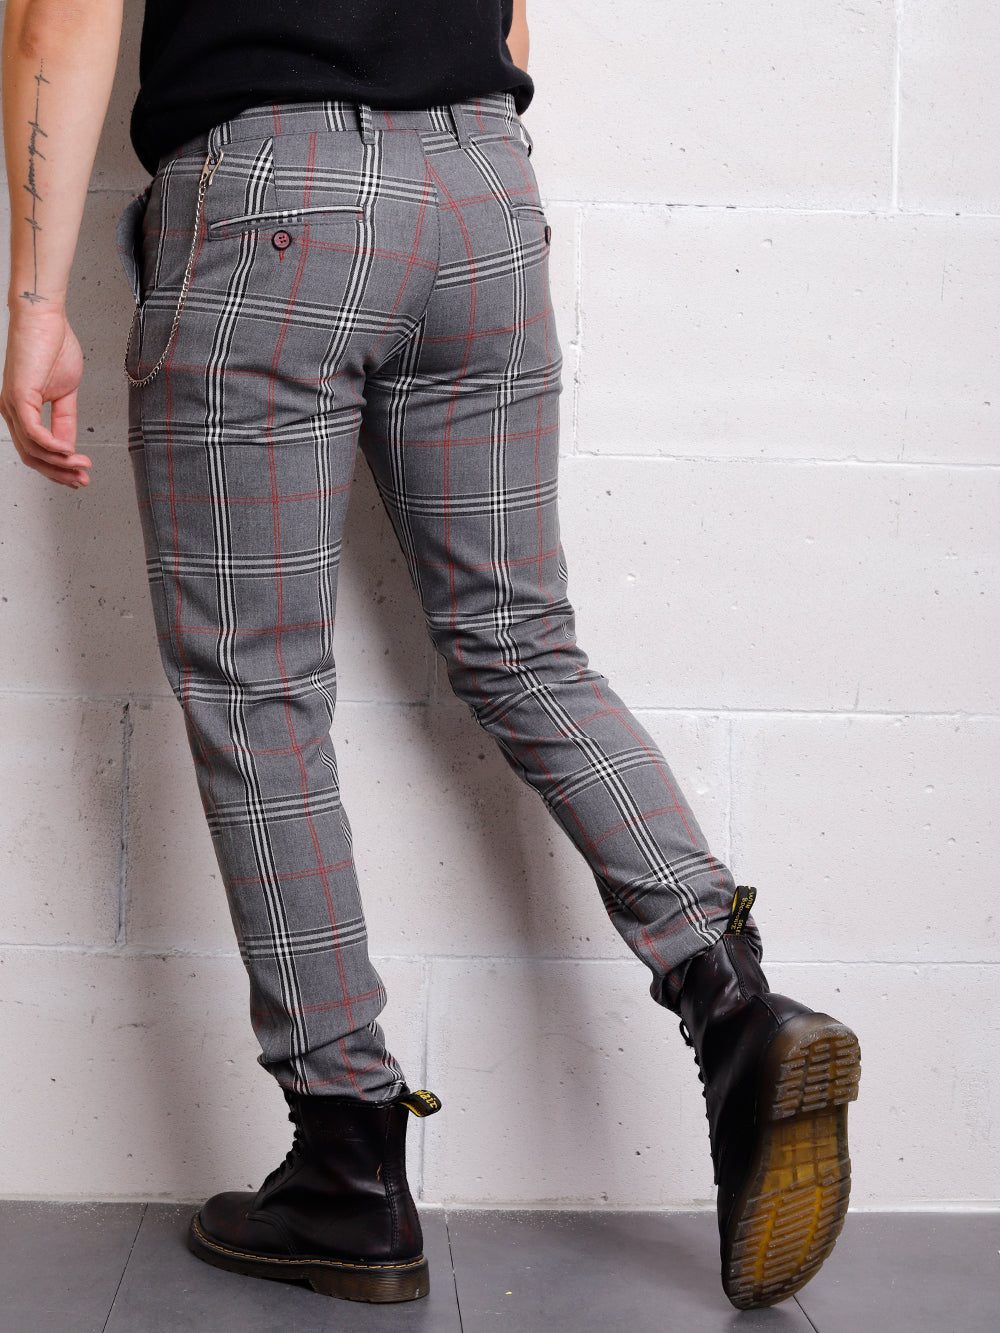 A man is standing against a wall wearing CHECKERED GREY pants.